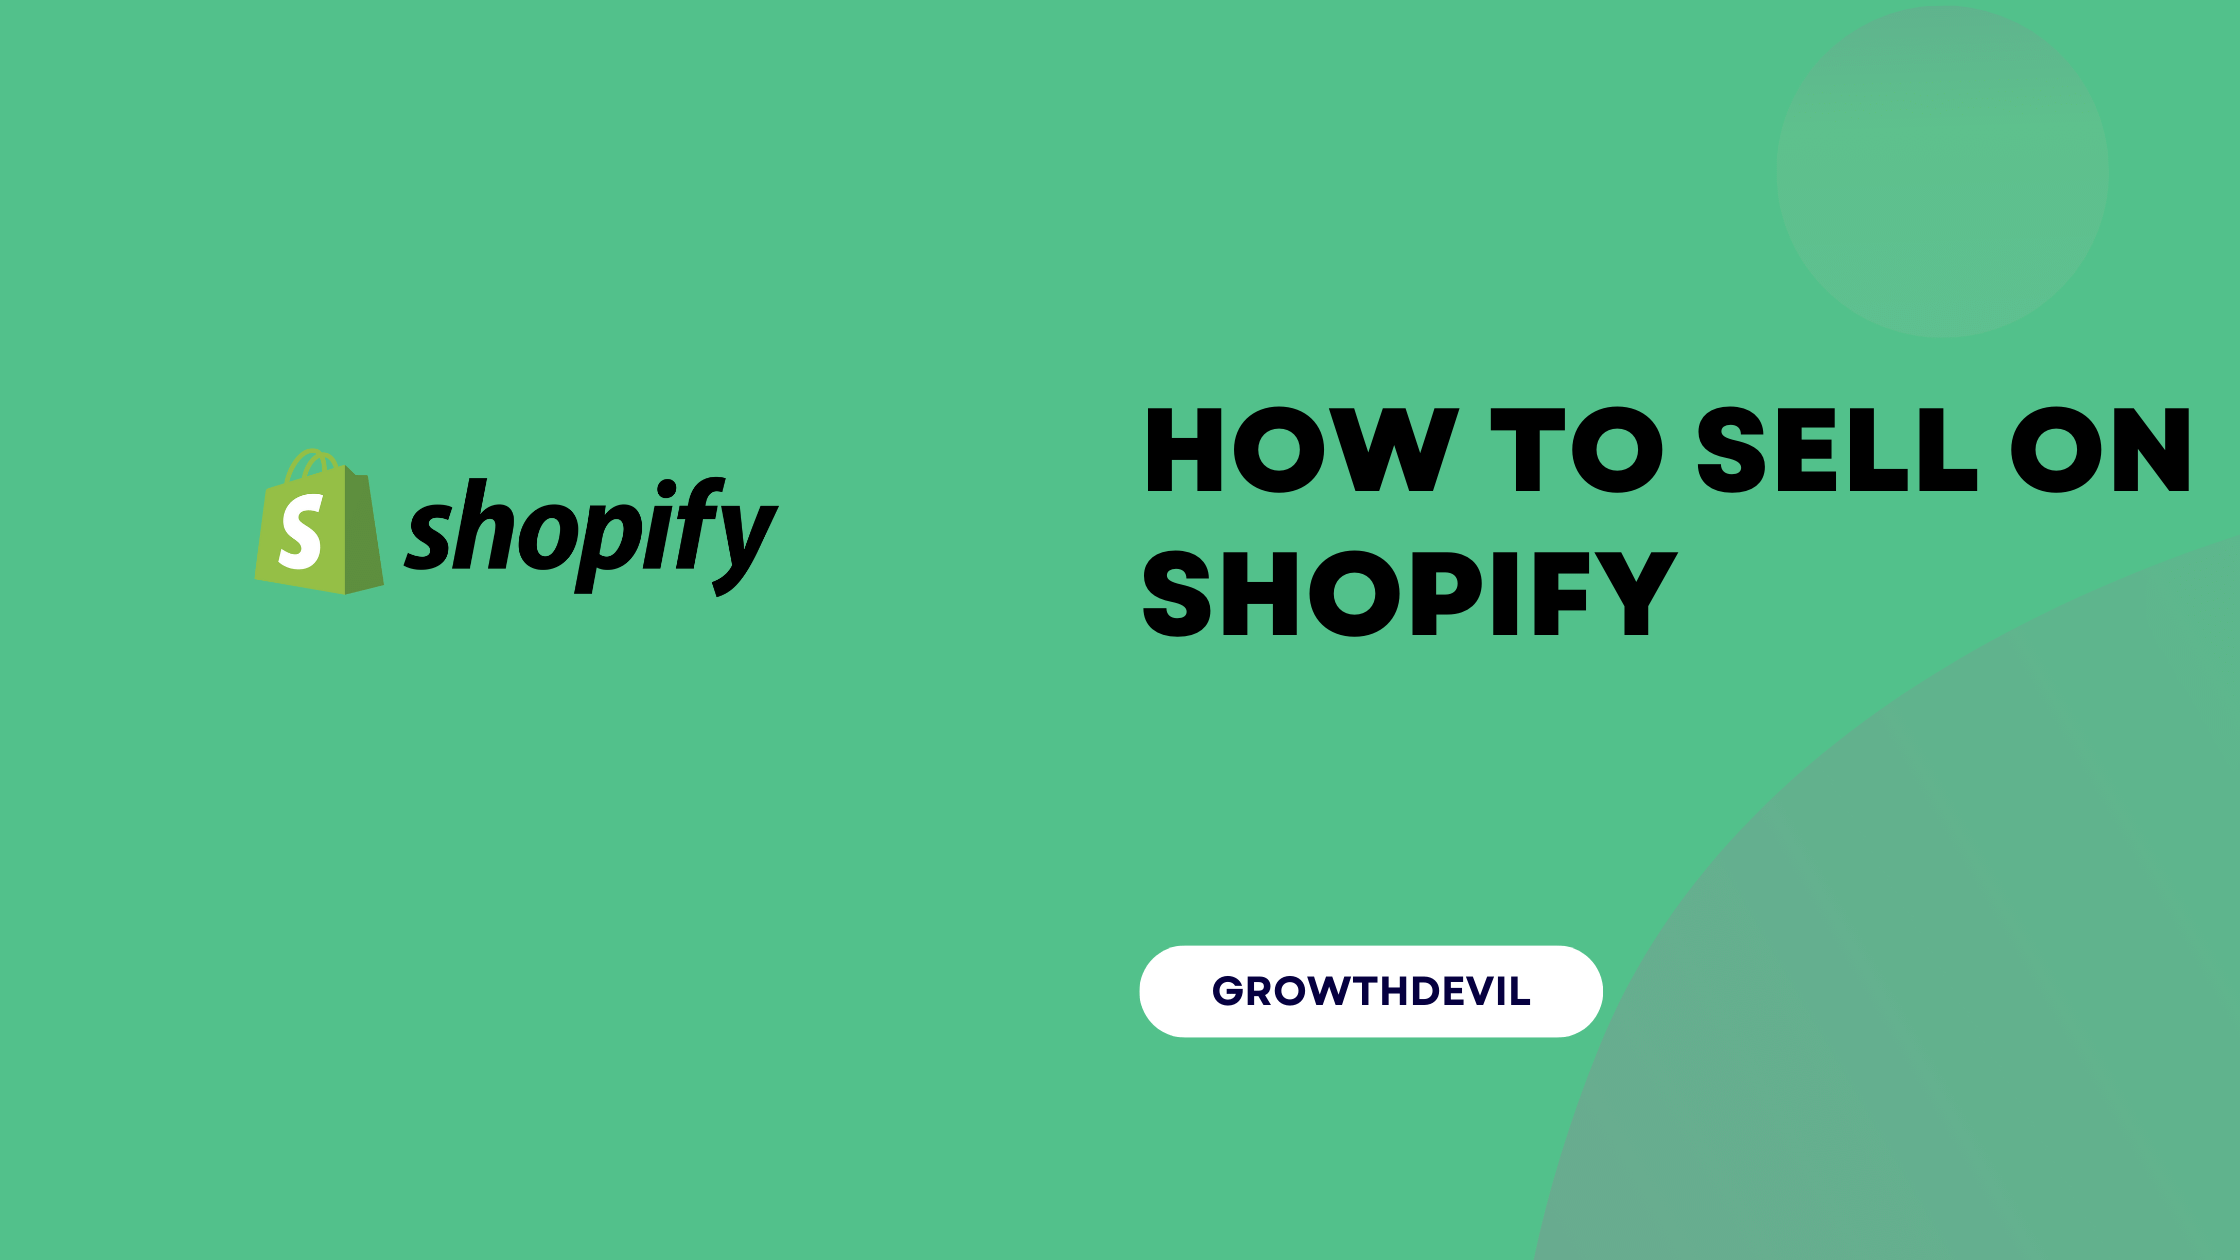 How To Sell On Shopify - GrowthDevil